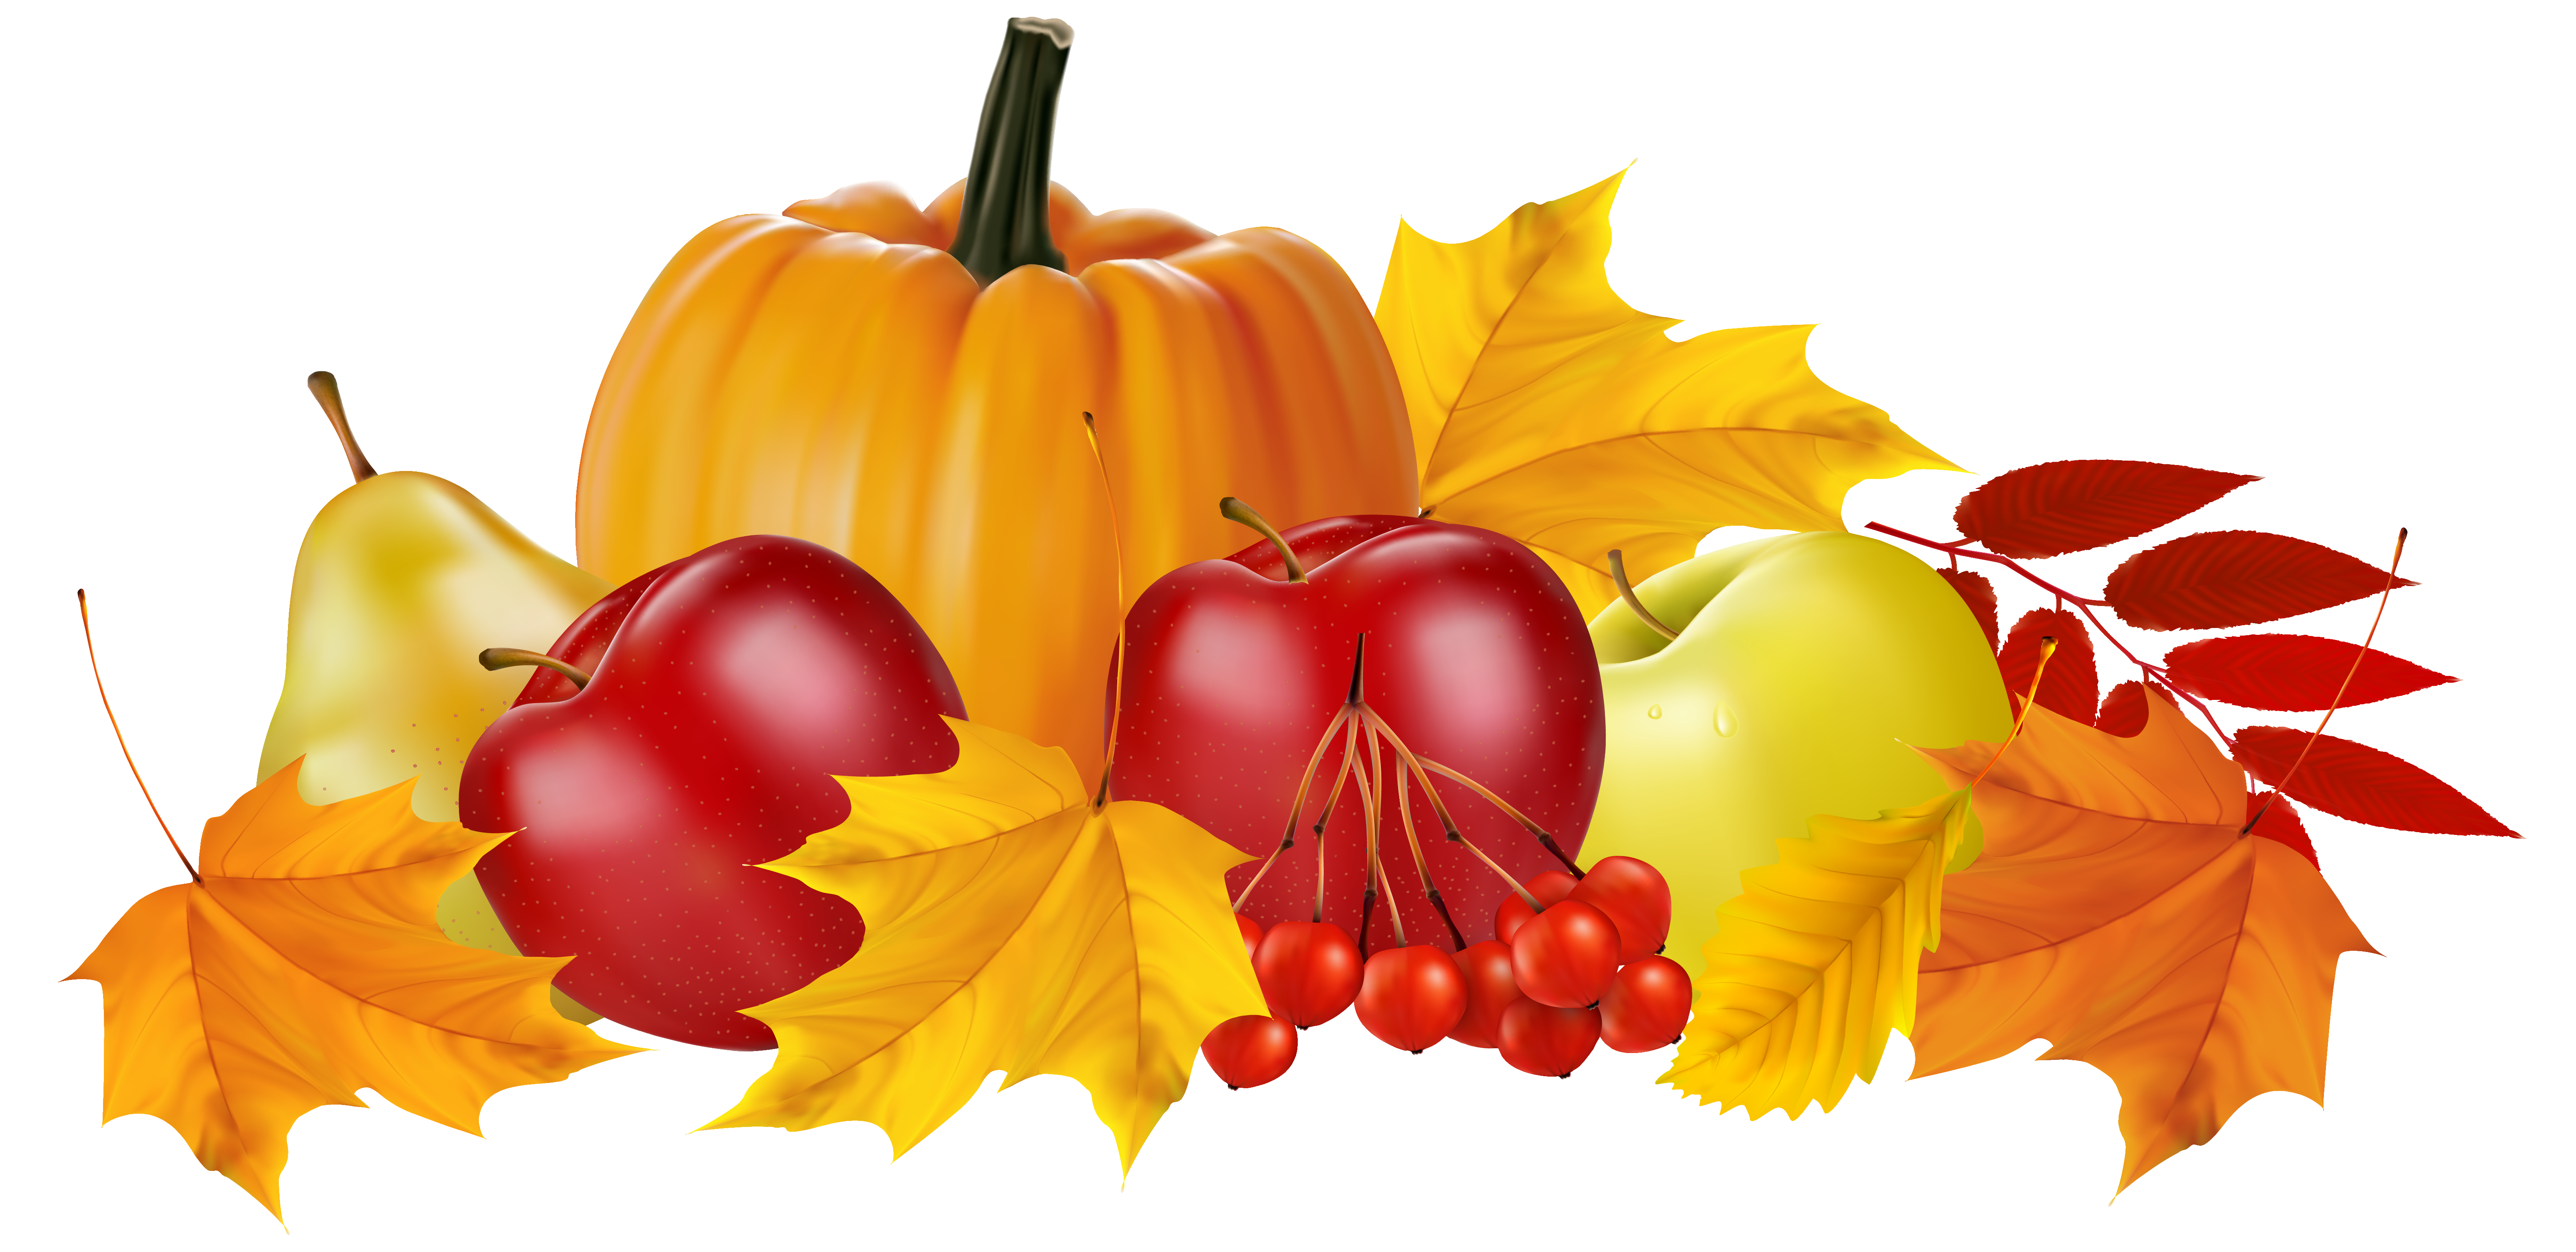 Autumn Pumpkin and Fruits PNG Clipart Image | Gallery ...